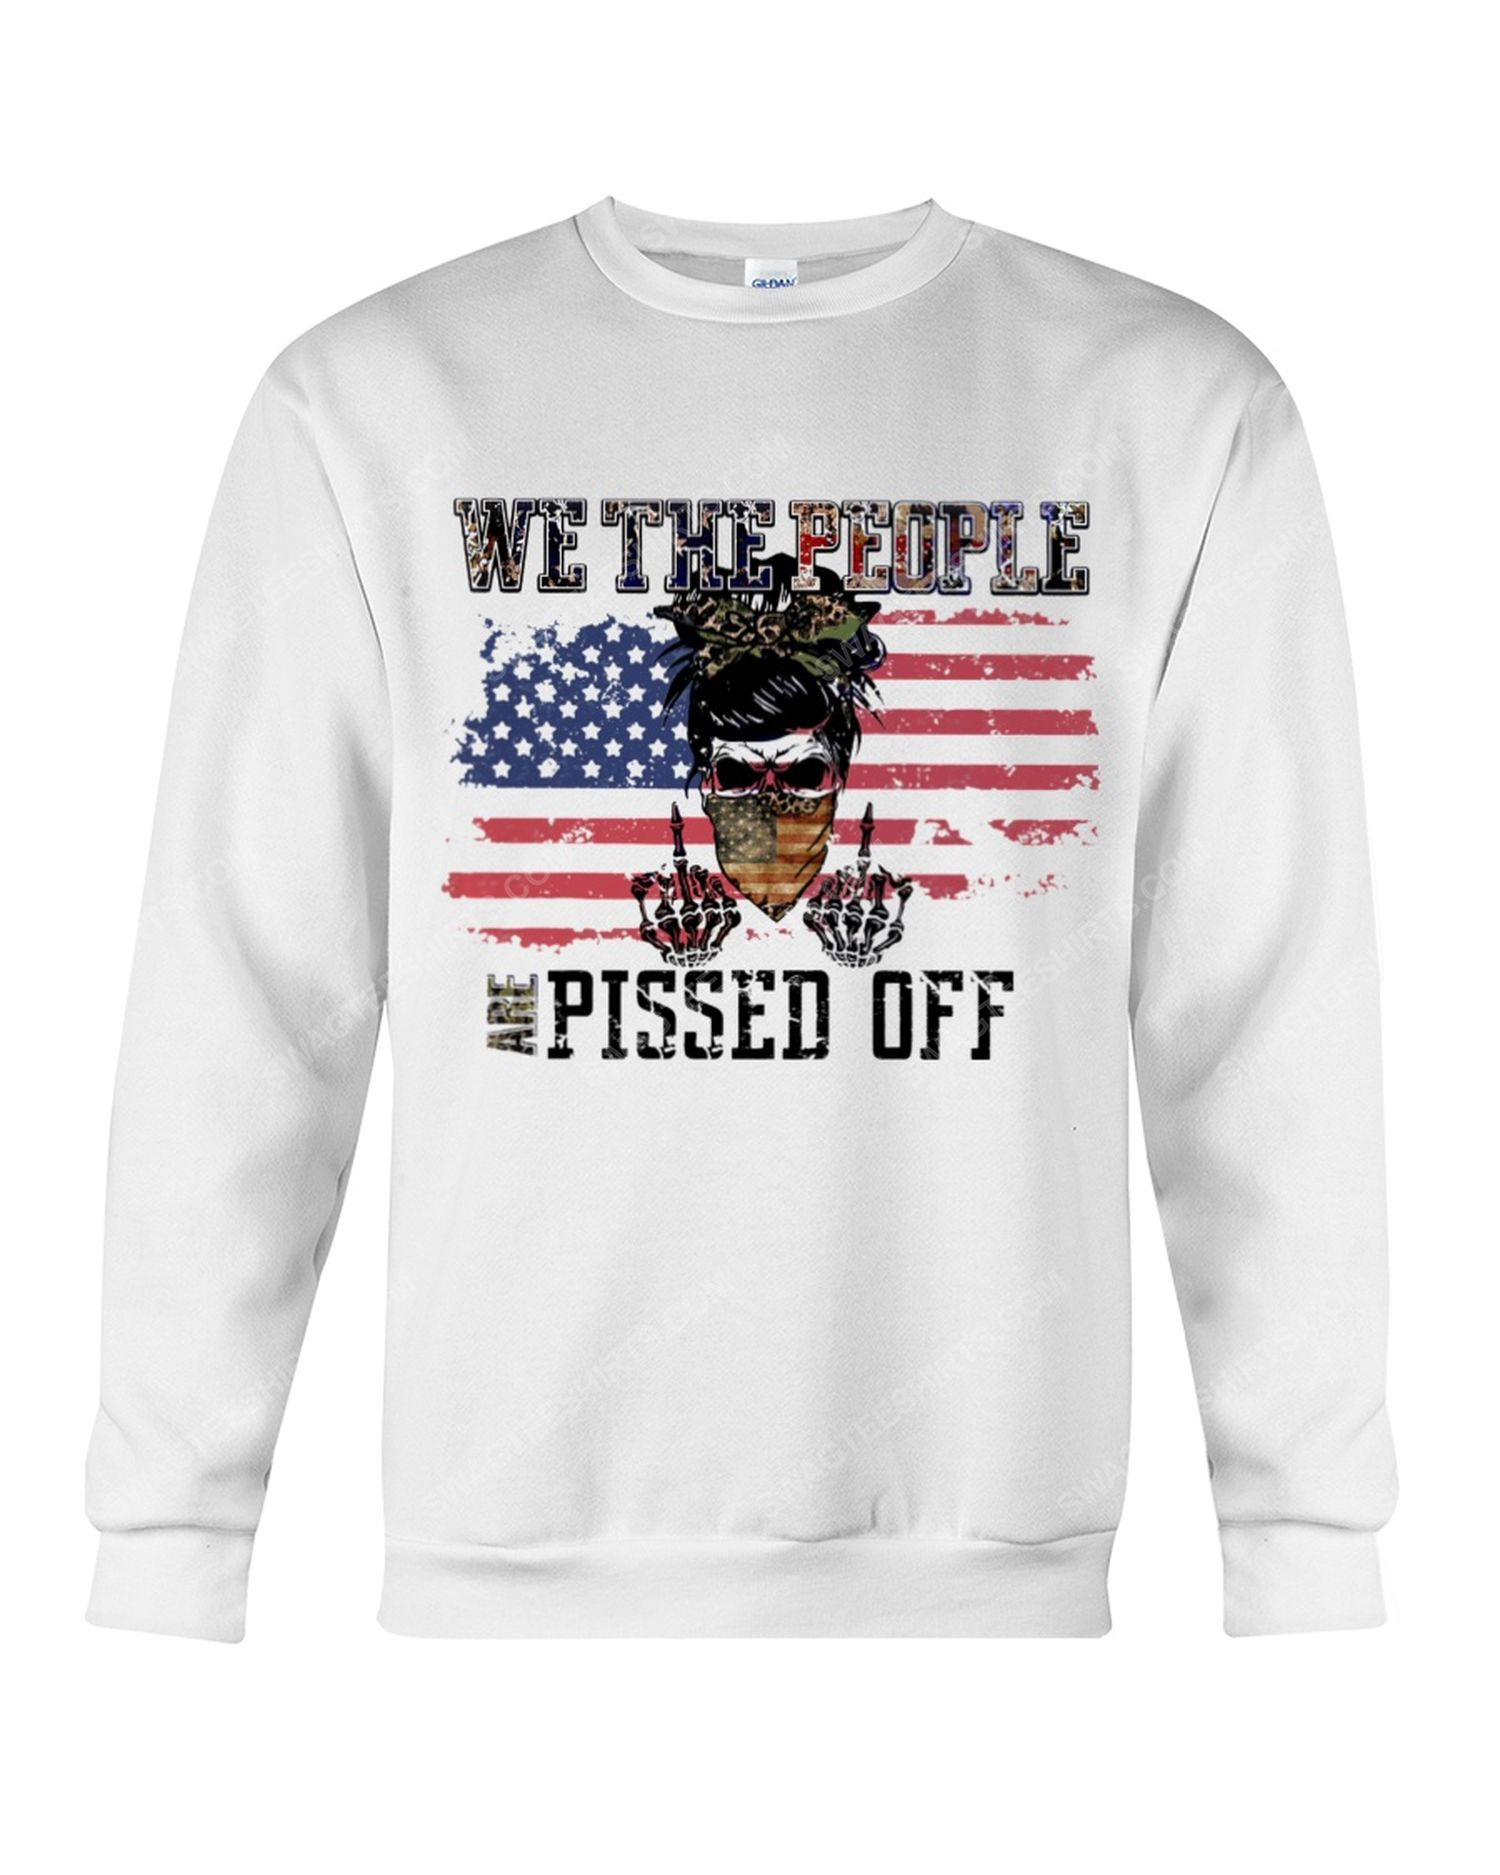 We the people are pissed off fight for democracy political sweatshirt